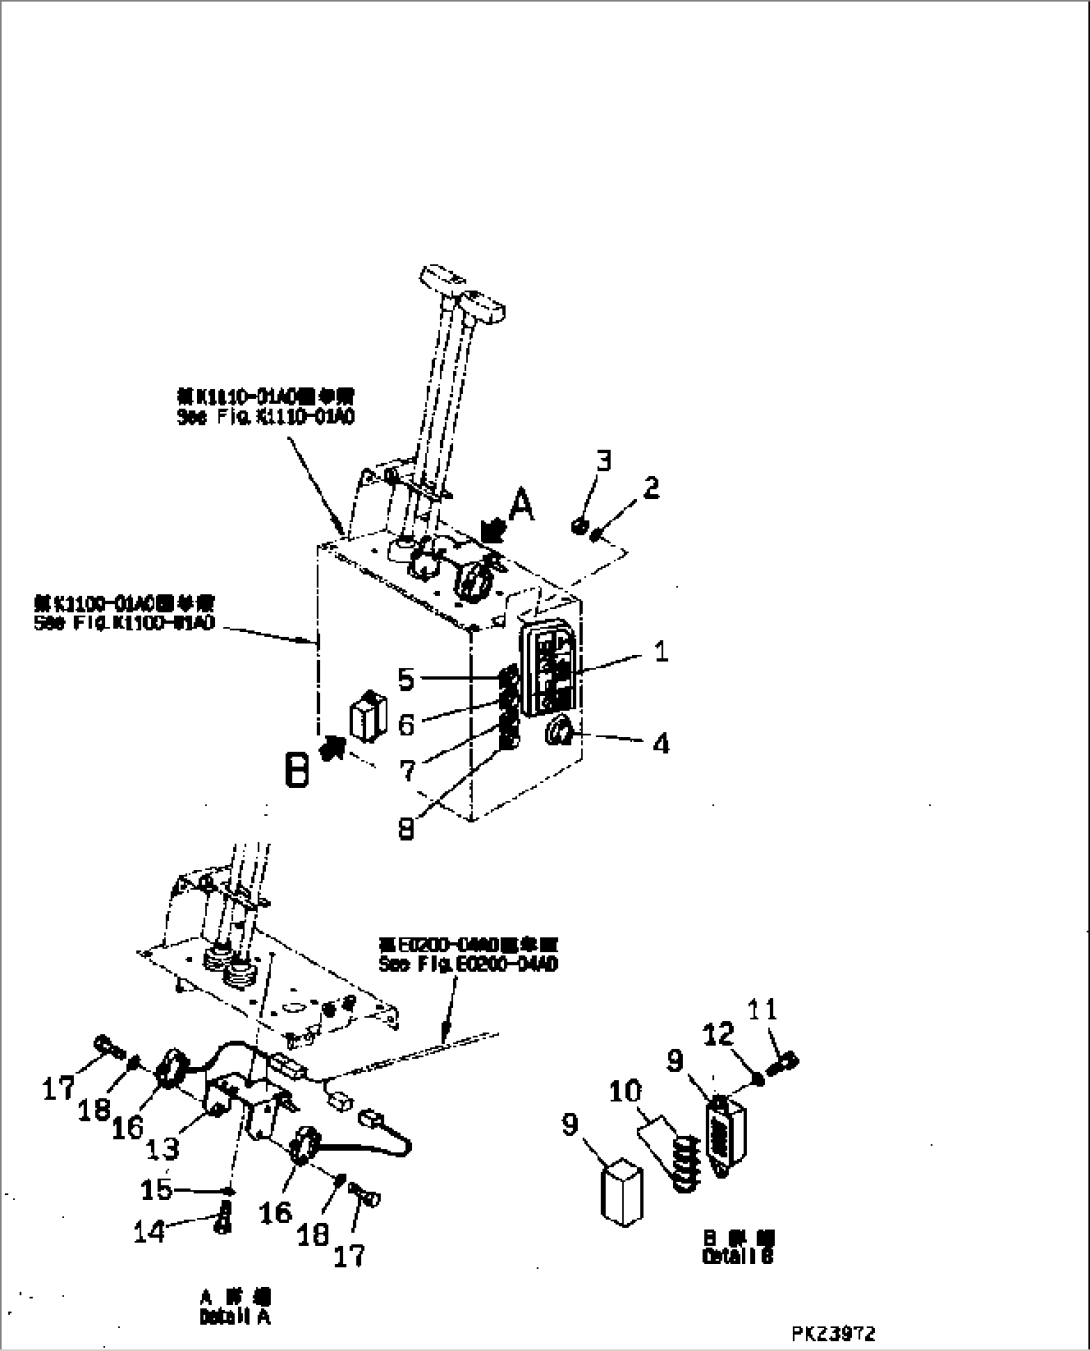 ELECTRICAL SYSTEM (3/5)(INSTRUMENT PANEL AND MAIN LINE)(1/2)